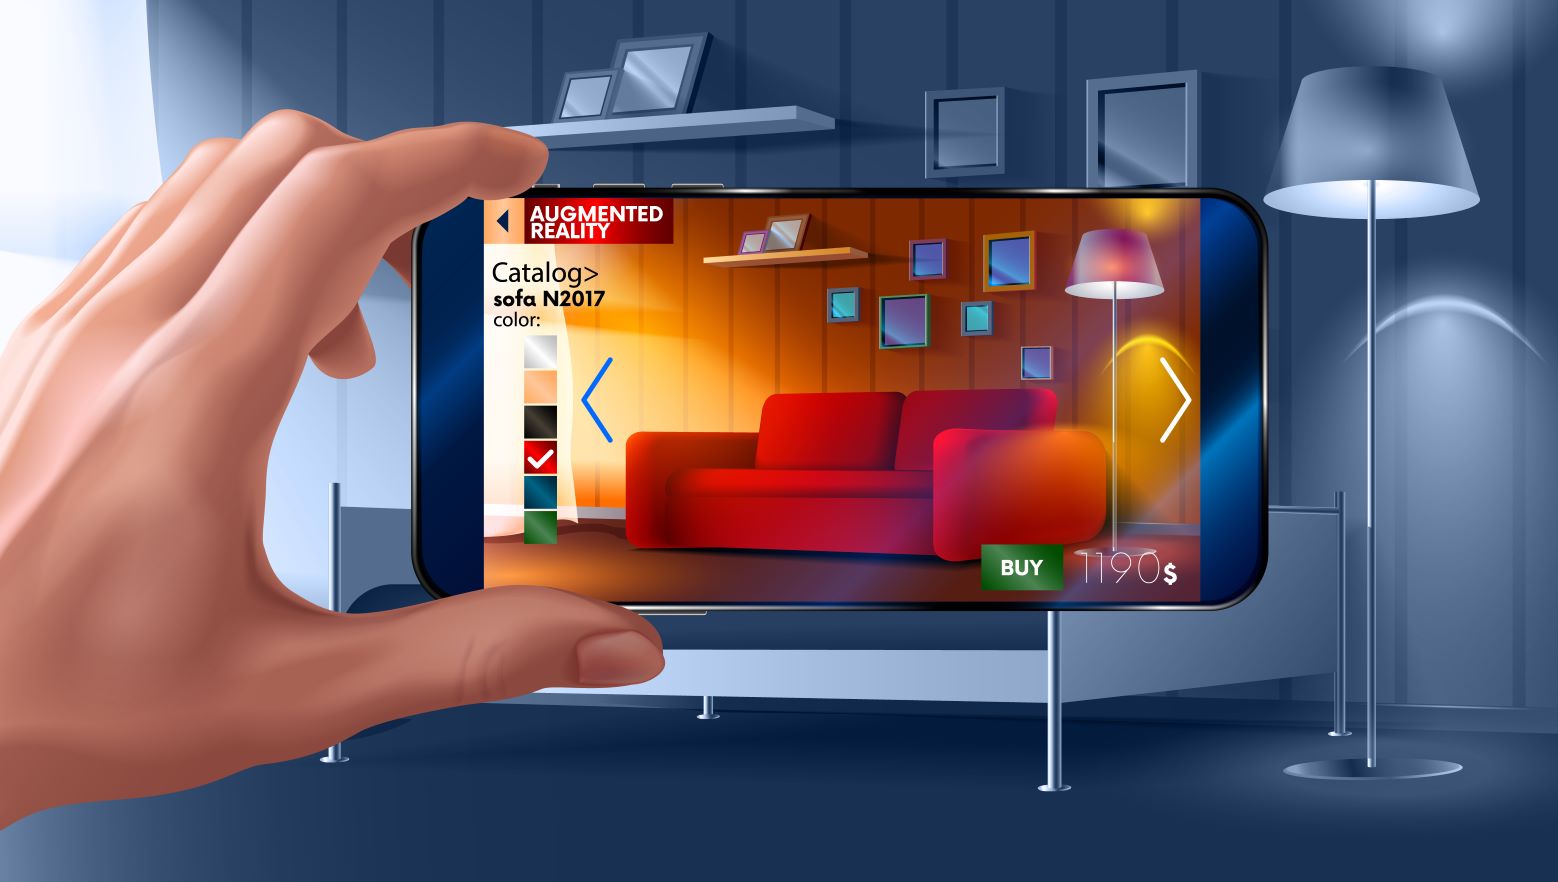 5 Popular Use Cases for Media Advertising in Augmented Reality